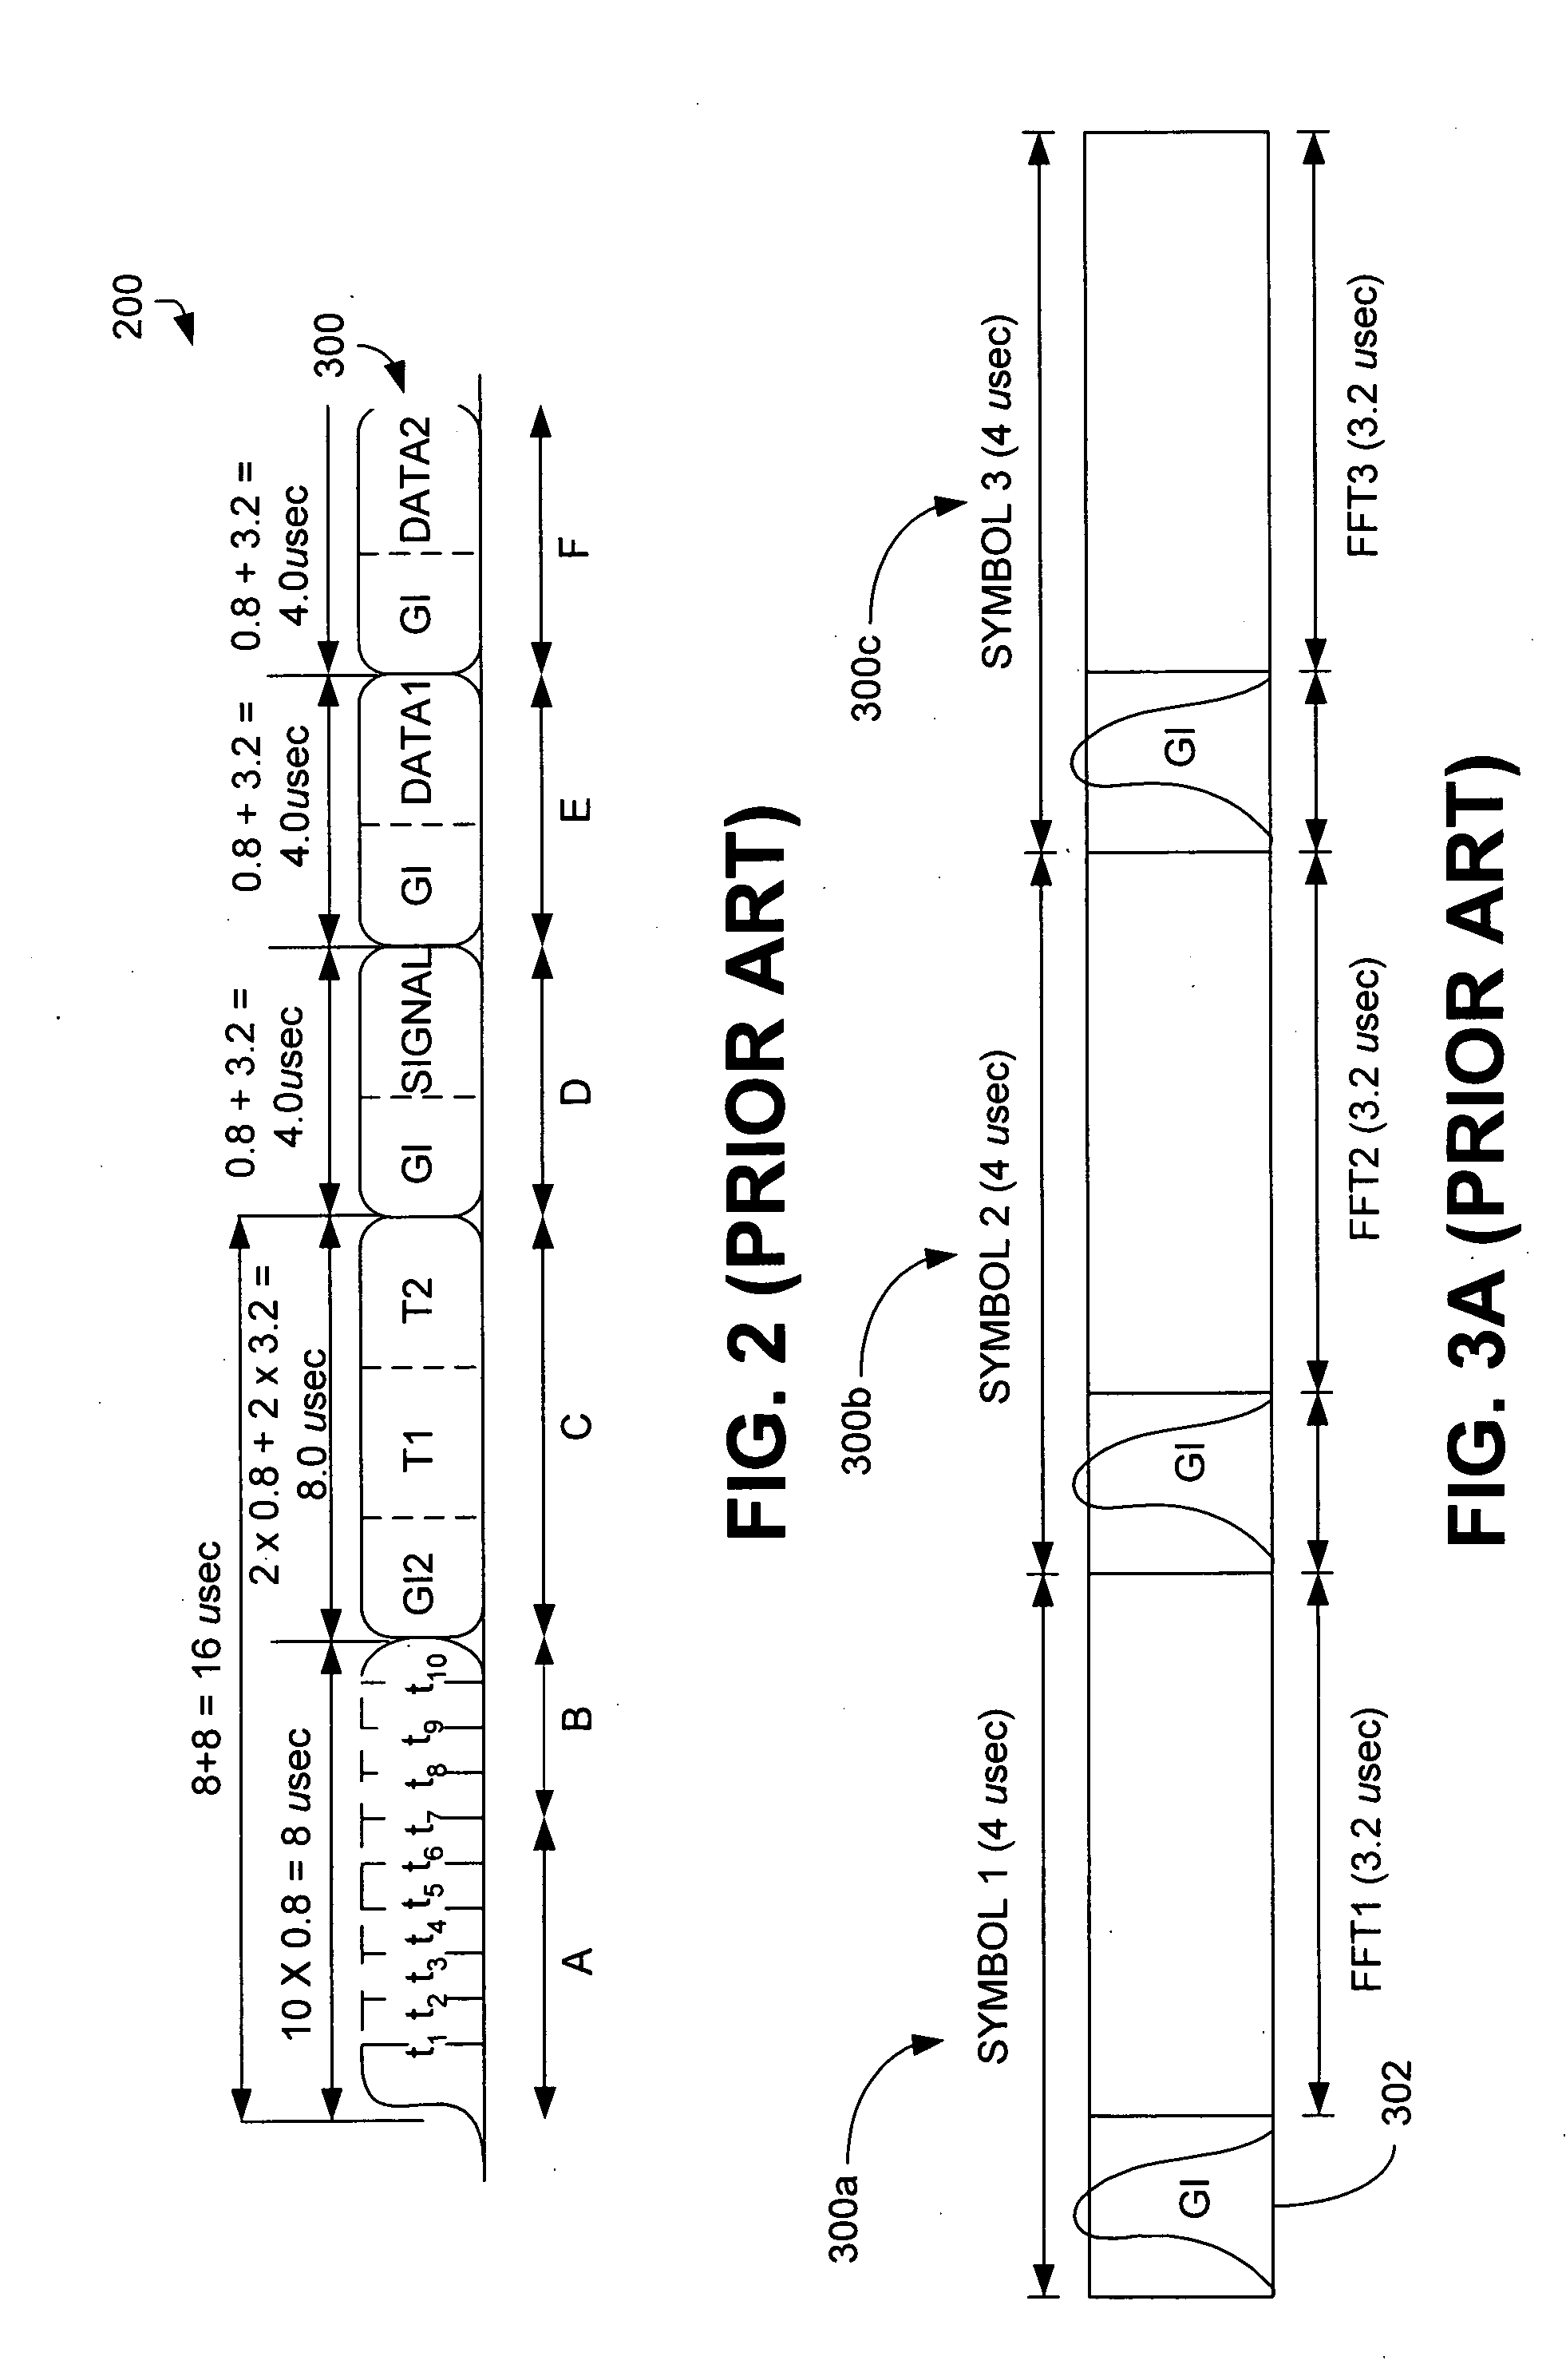 Cyclic diversity systems and methods